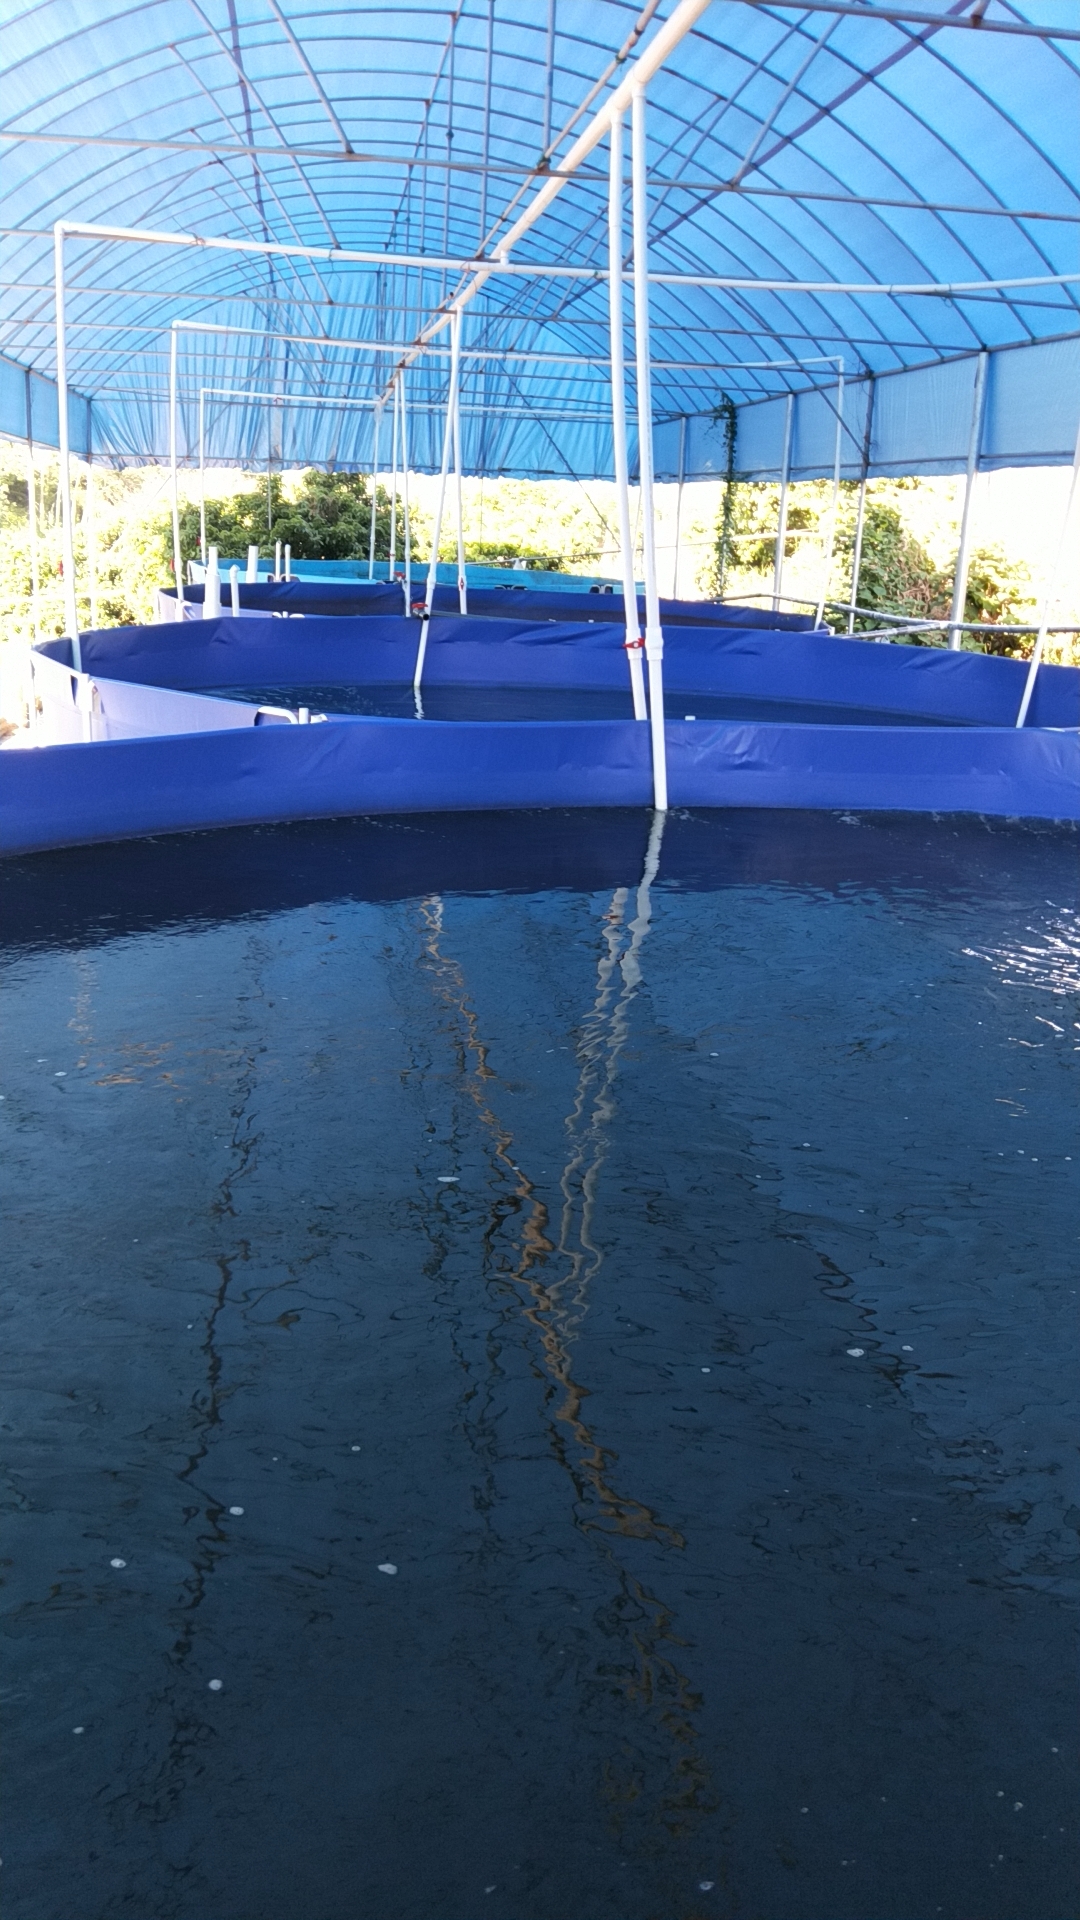 Circular fish farming tank plays an important role in RAS system